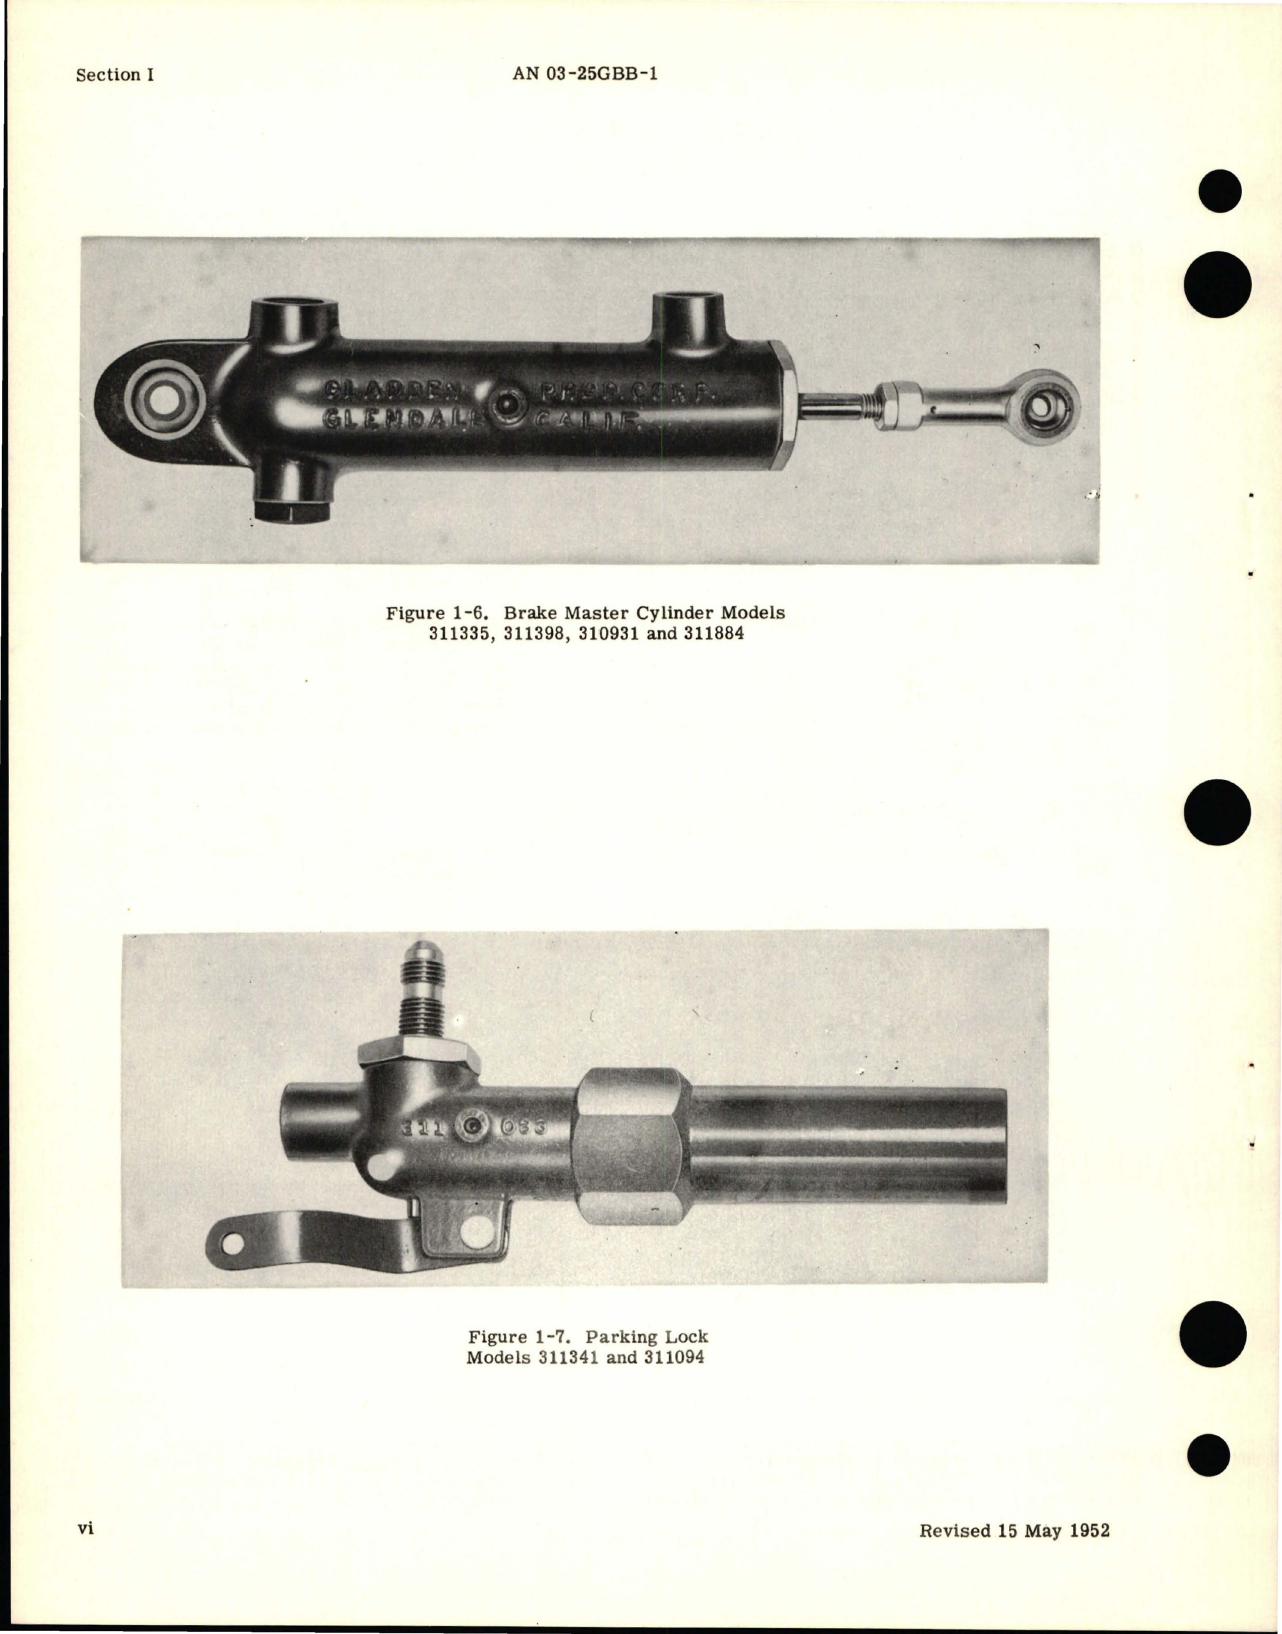 Sample page 8 from AirCorps Library document: Overhaul Instructions for Master Brake Cylinders and Parking Lock